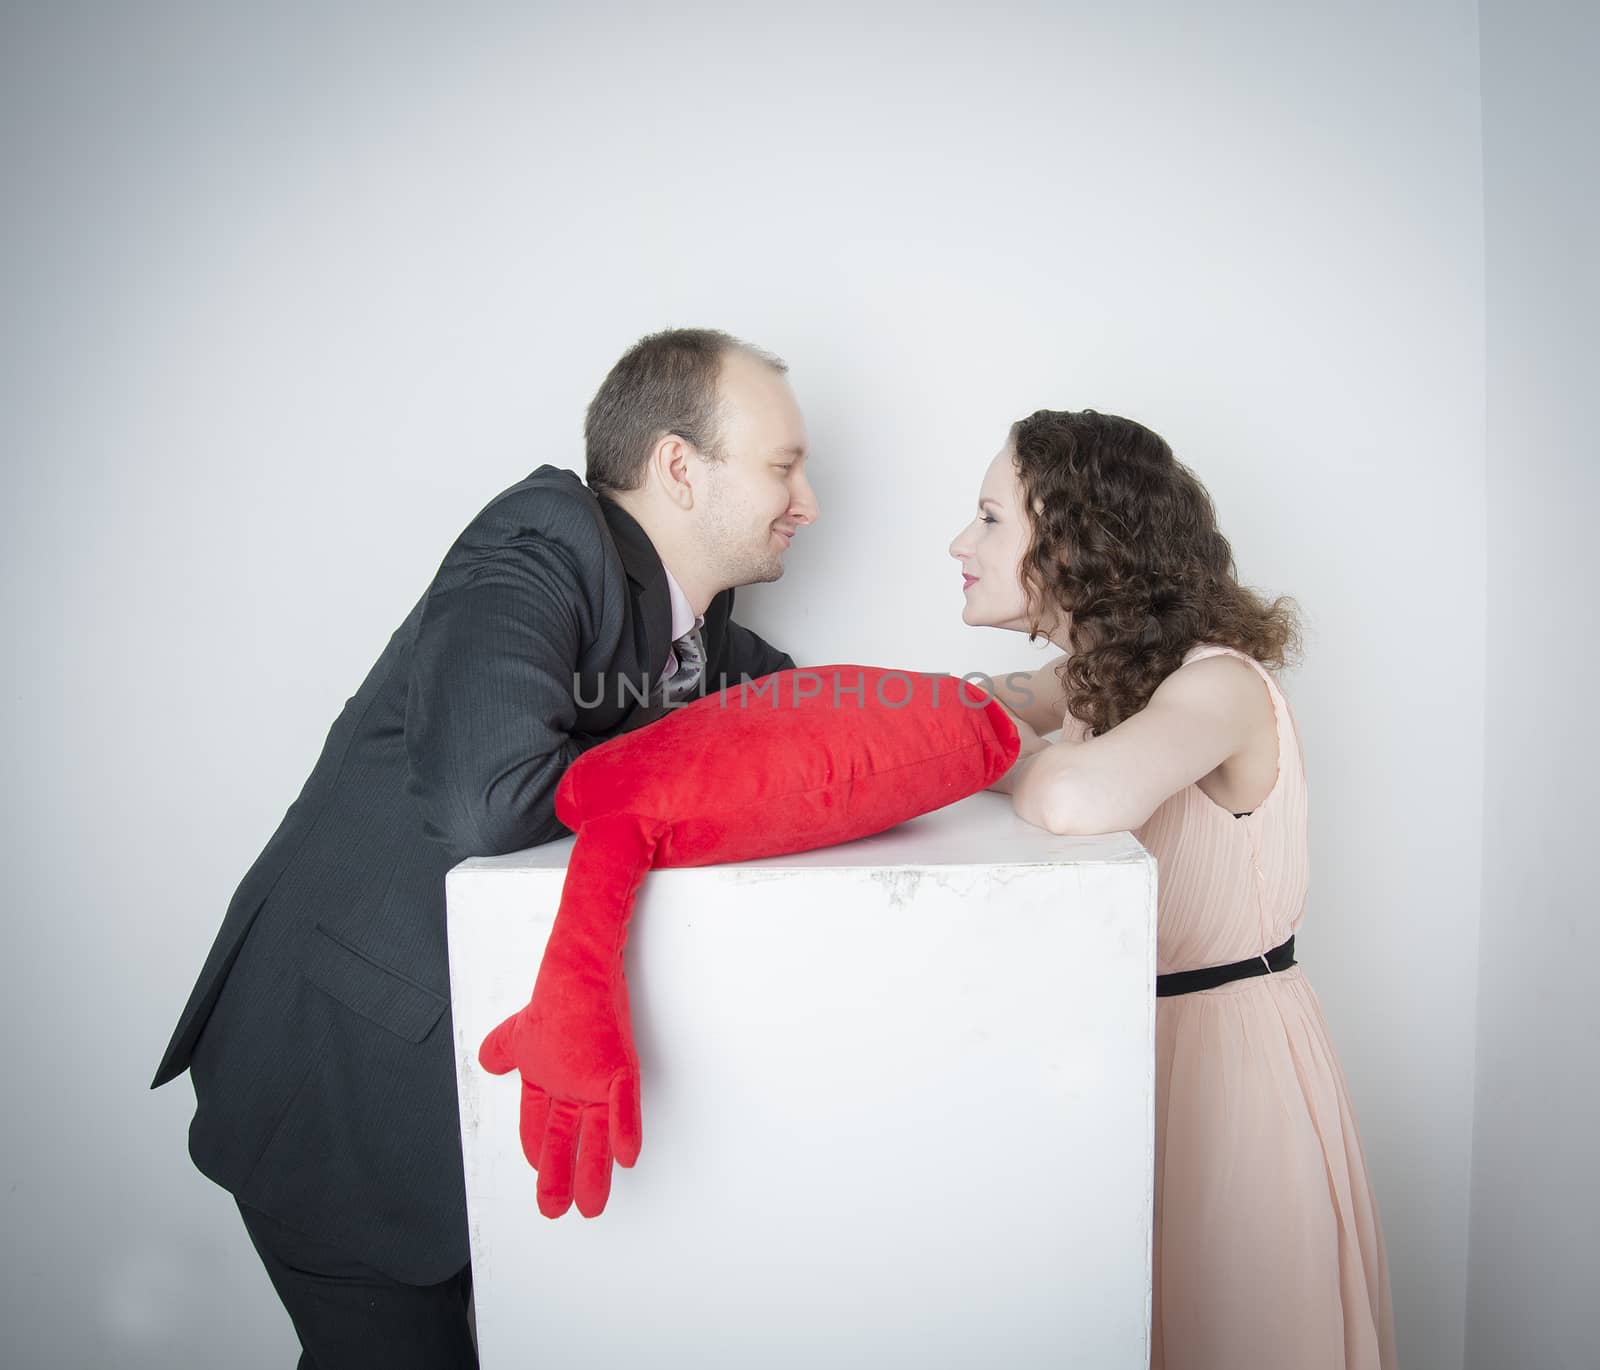 man and woman holding a red heart